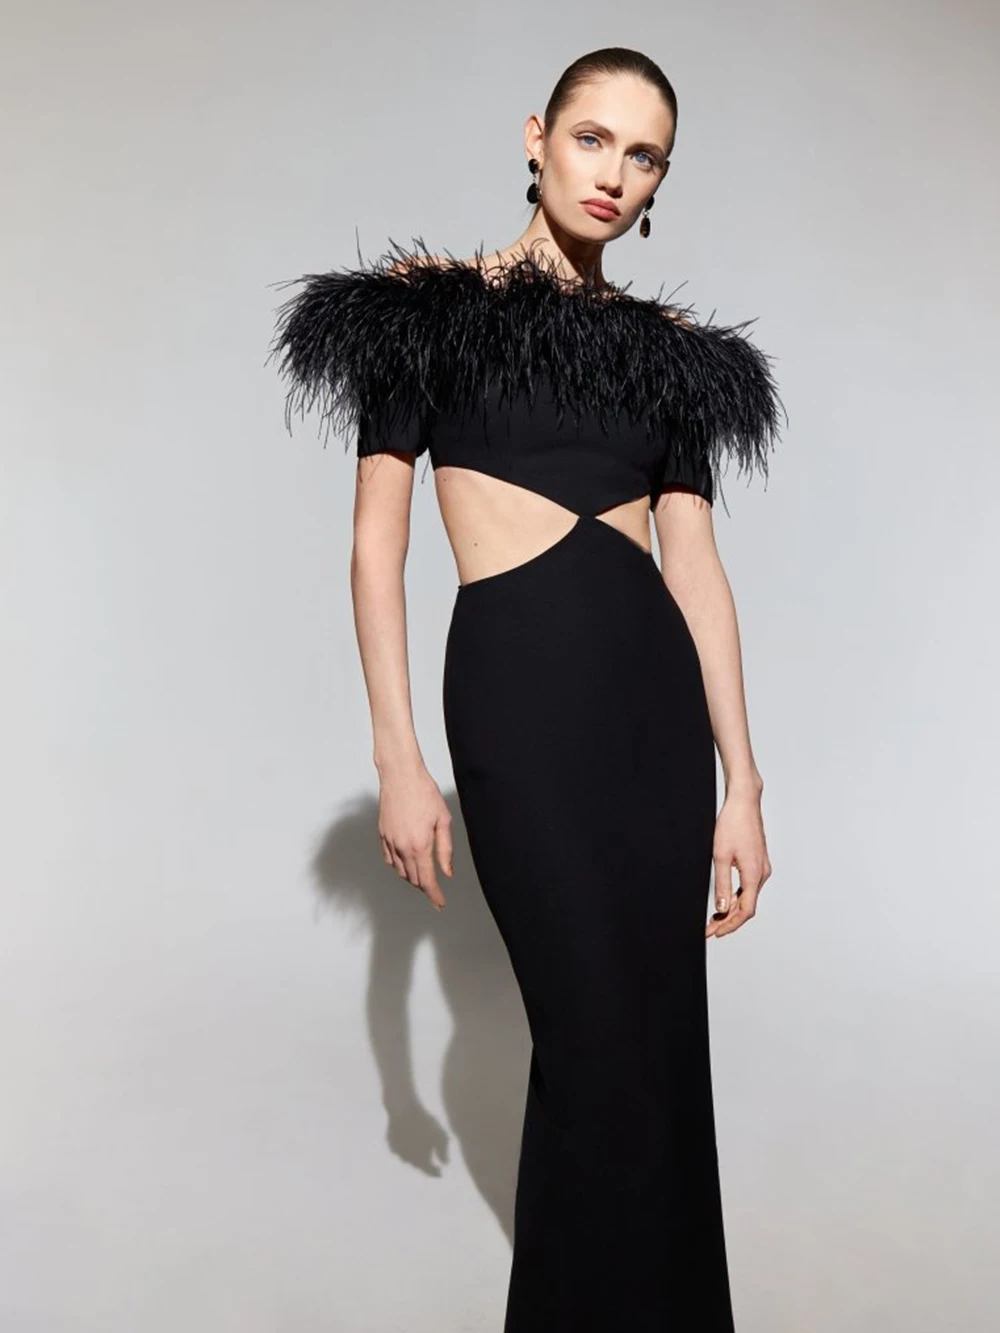 High Quality Women Prom Gowns Elegant Feather Furry Camisole Dress Cut Out Maxi Long Celebrity Evening Party Birthday Dresses